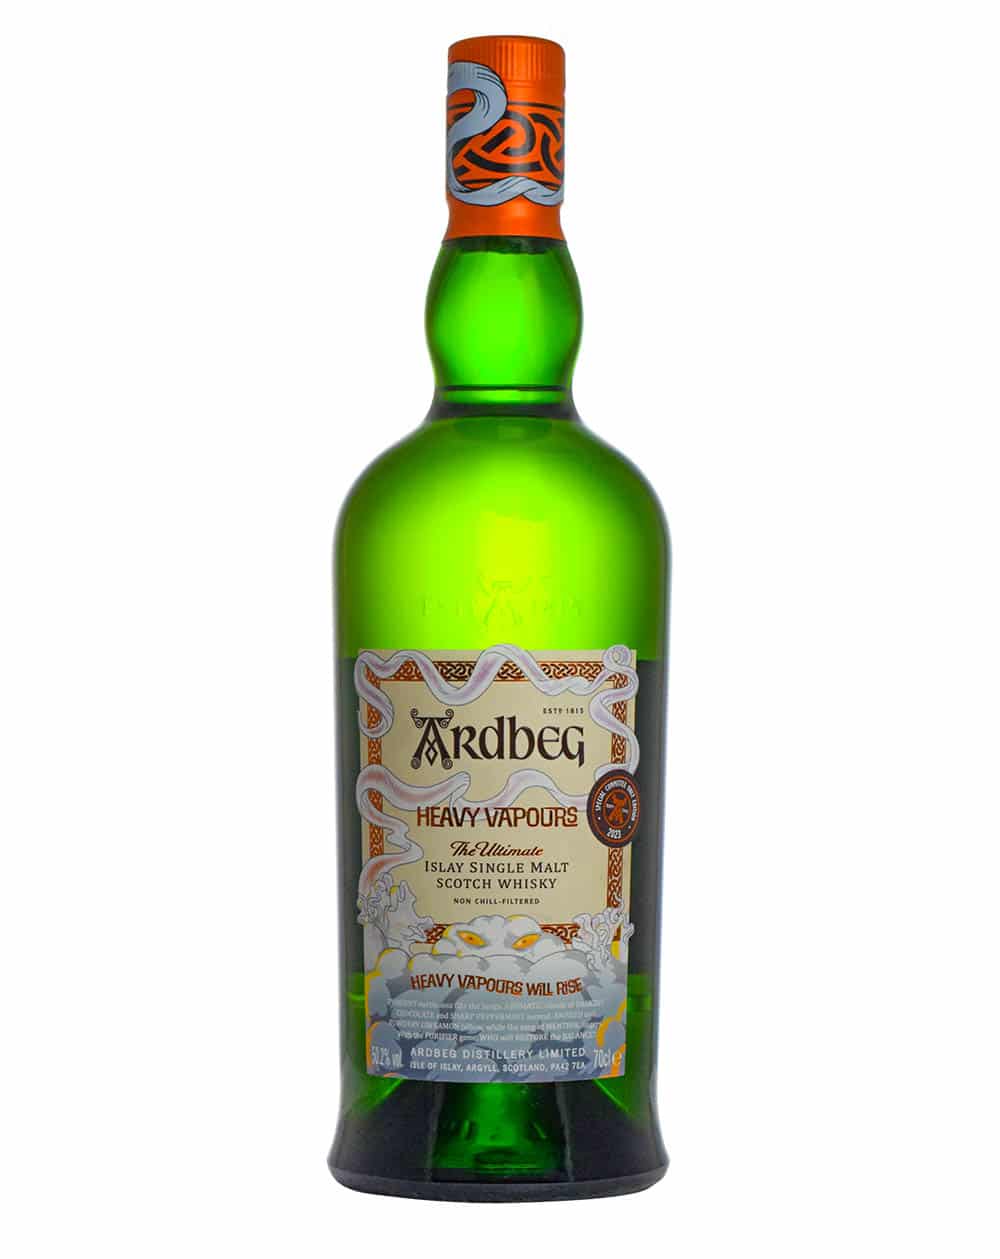 Ardbeg Heavy Vapours Commitee Release Must Have Malts MHM